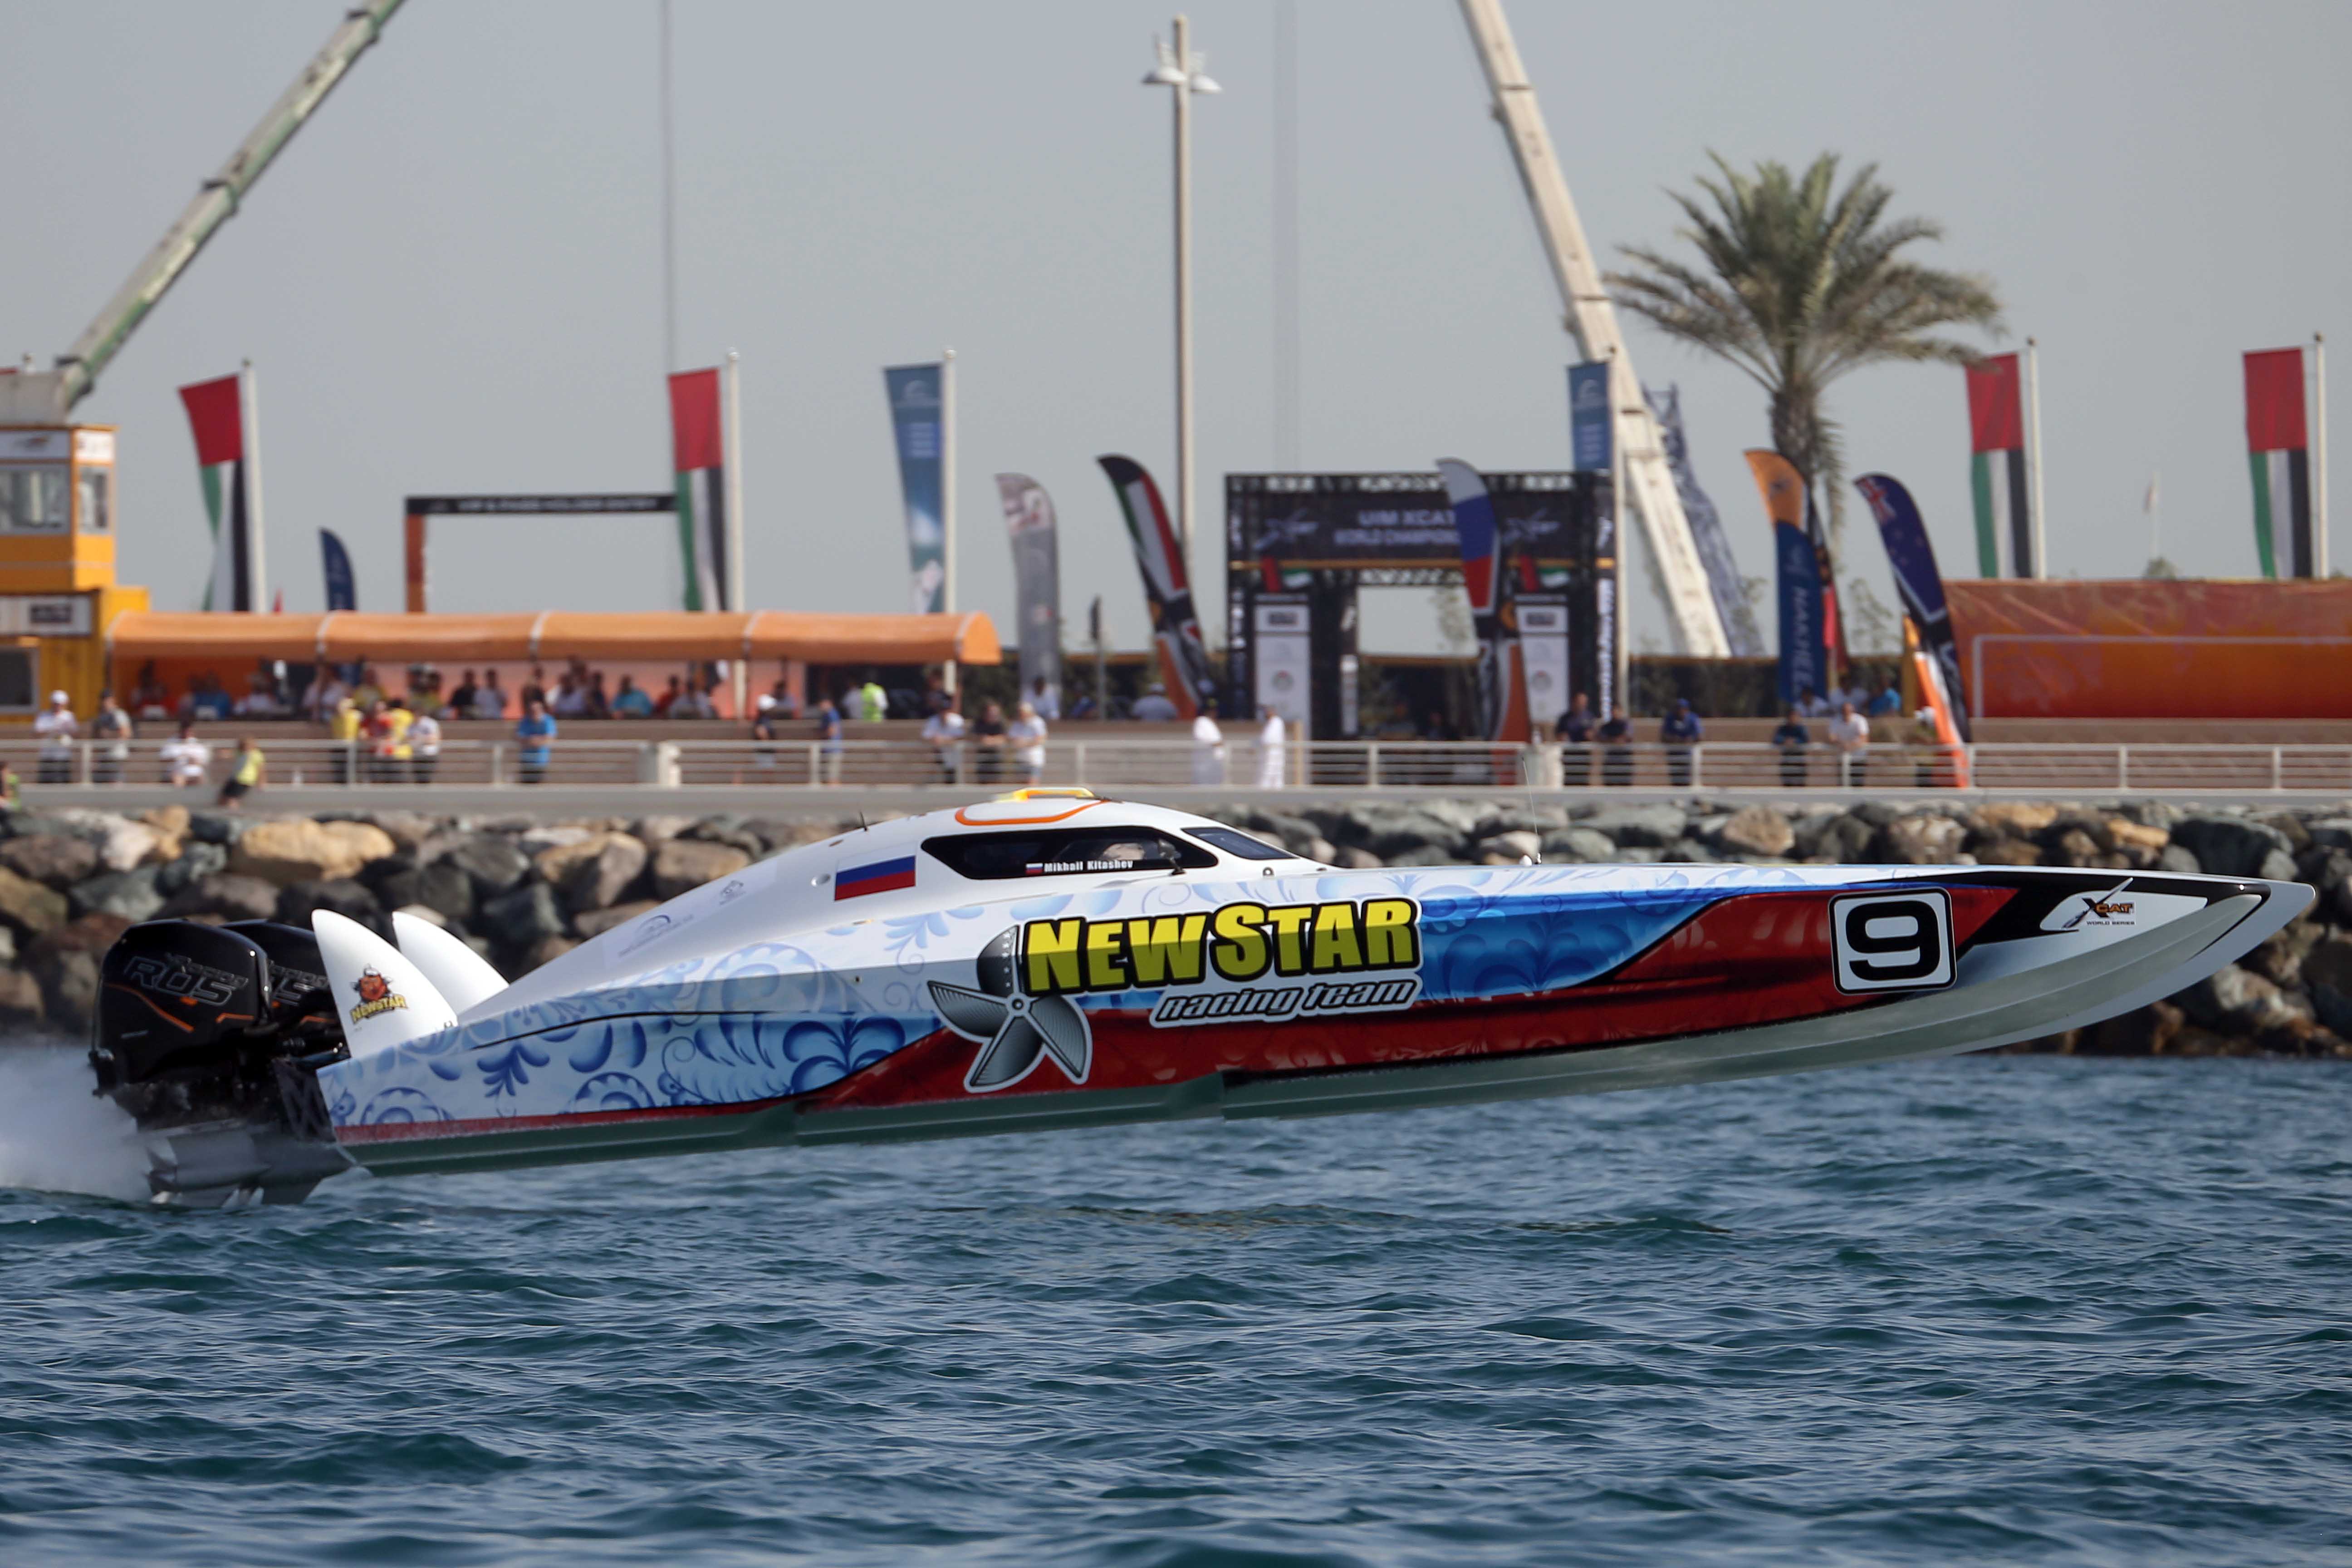 Marine Sports Festival in Jumeirah this Weekend